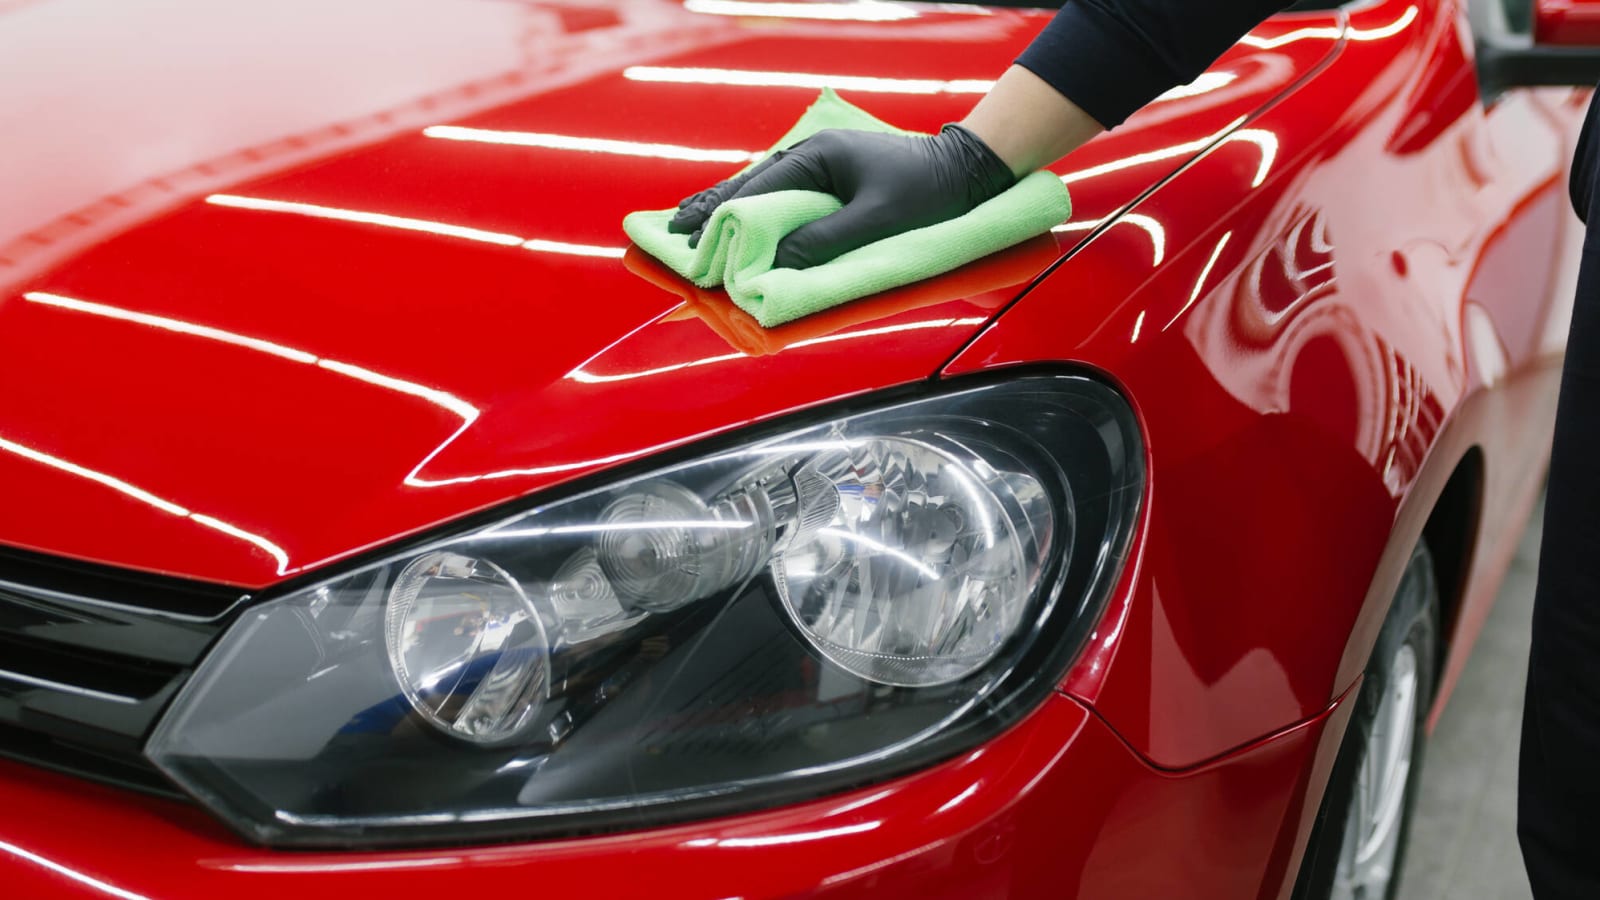 Top 5 Ways to Keep Your Car Clean and Organized - Mobile Detailing